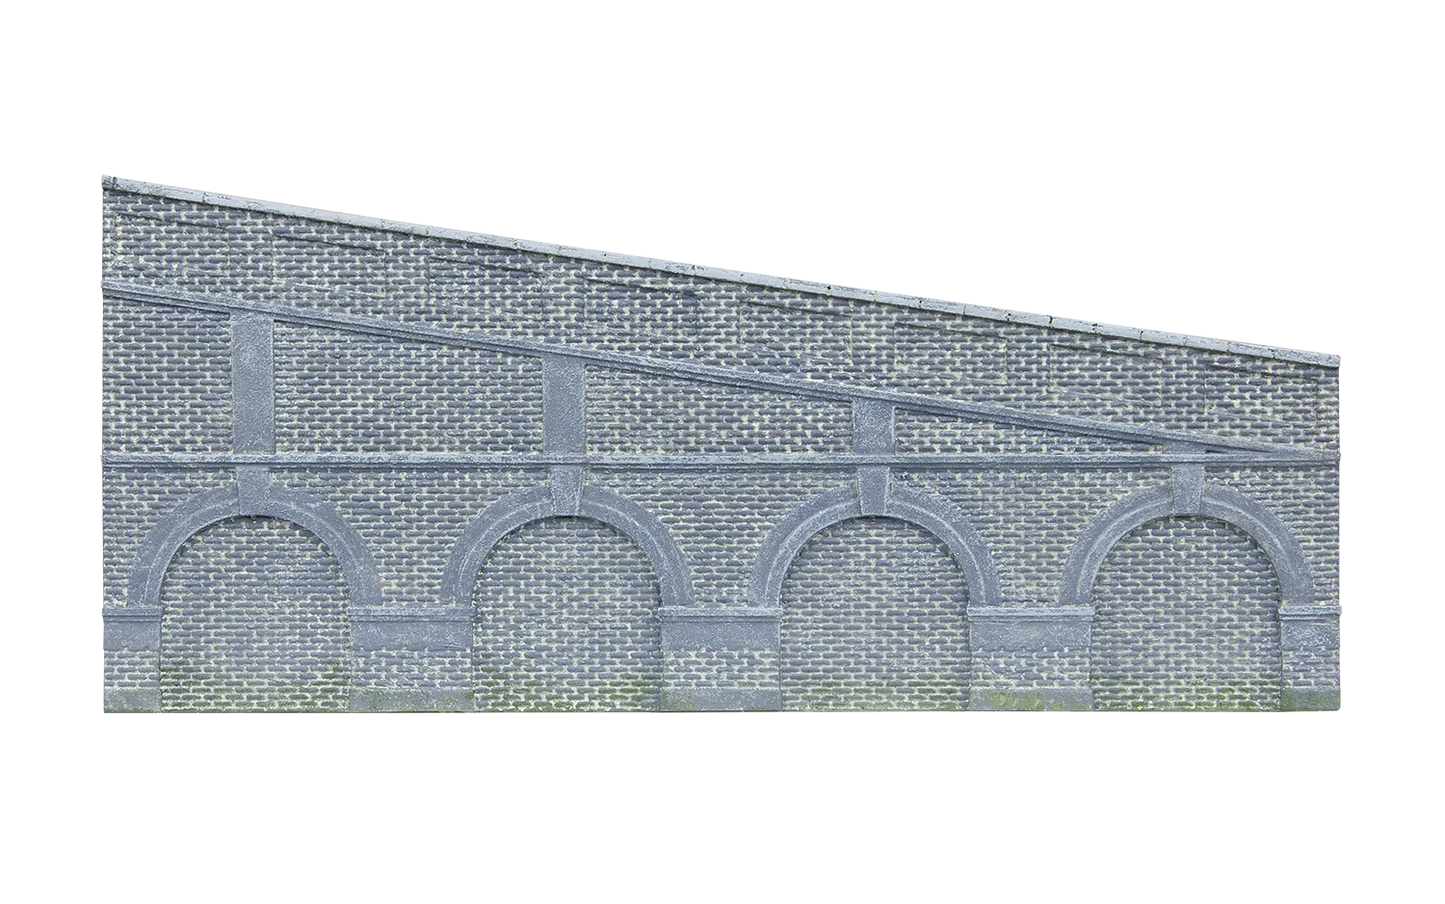 Mid Stepped Arched Retaining Walls x2 (Engineers Blue Brick) - Chester Model Centre